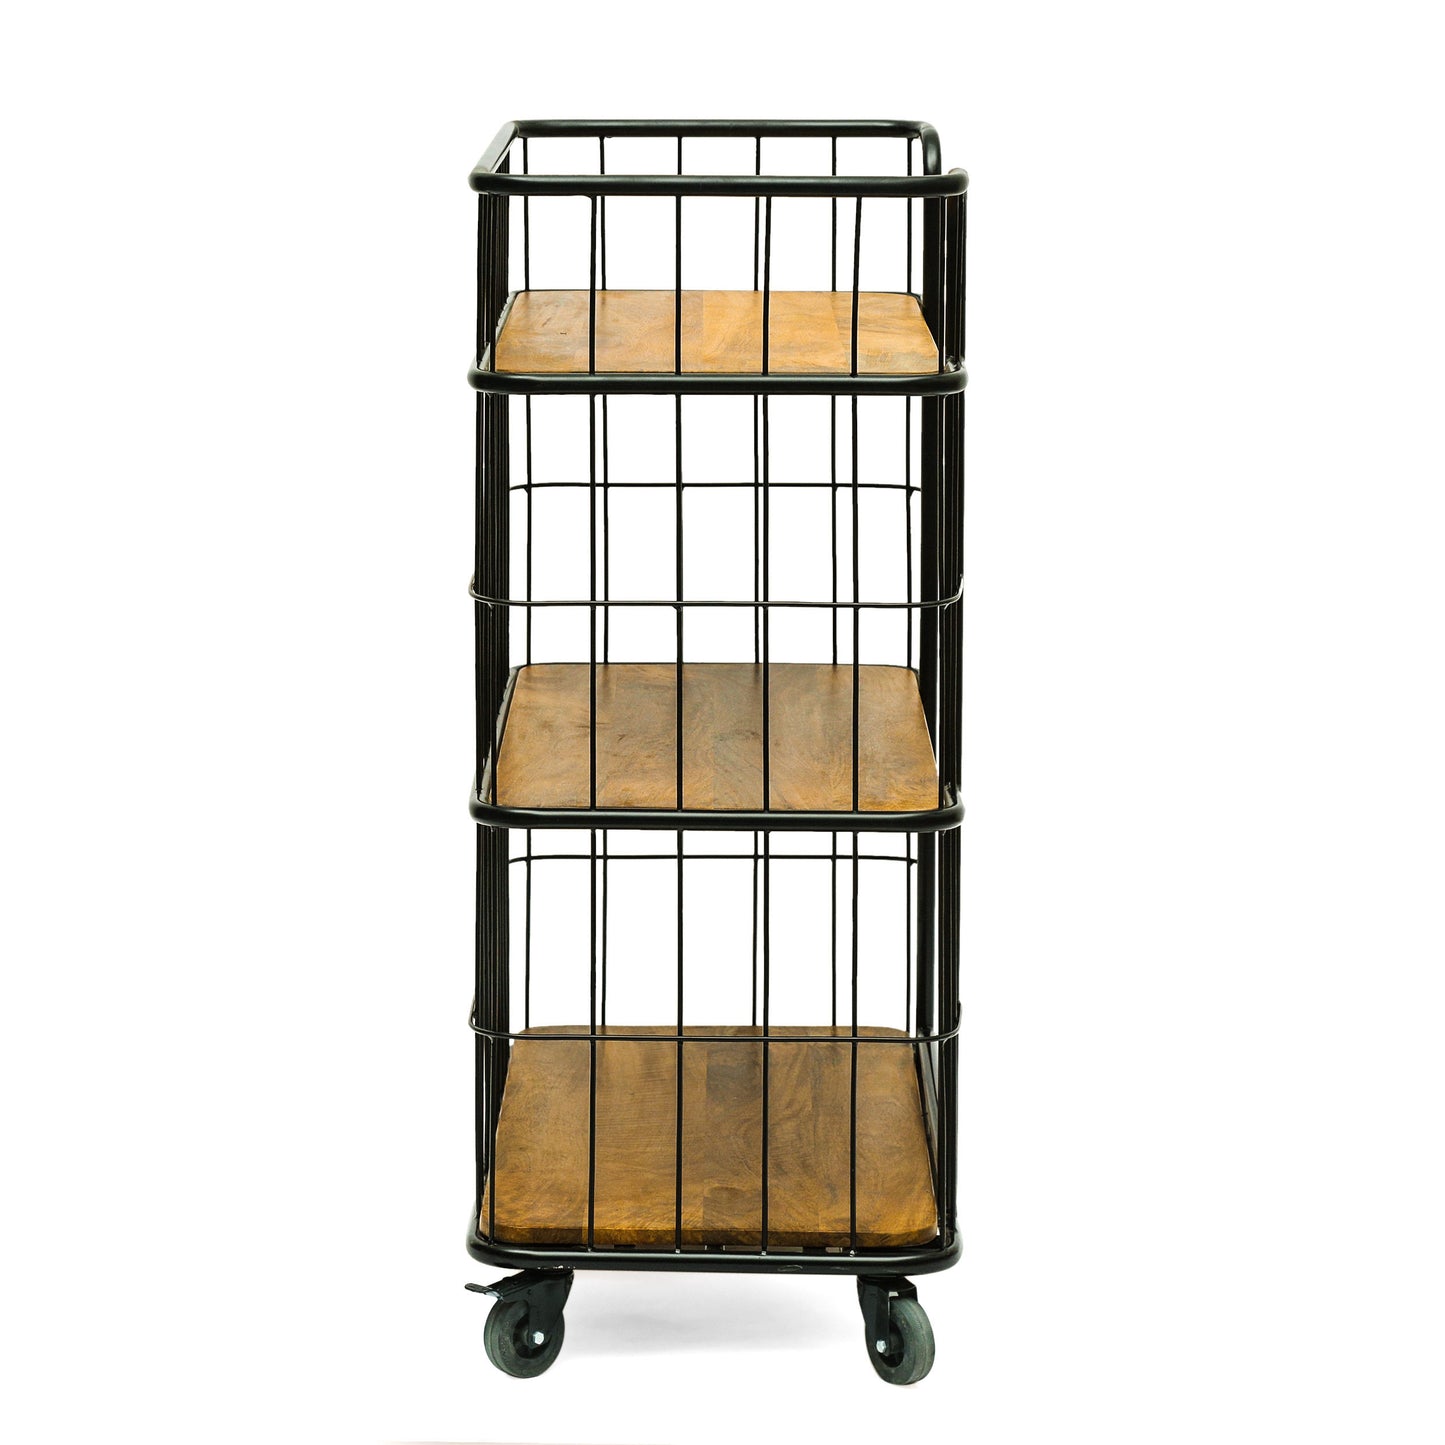 Baddow Modern Industrial Handcrafted Mango Wood Kitchen Cart with Wheels, Natural and Black